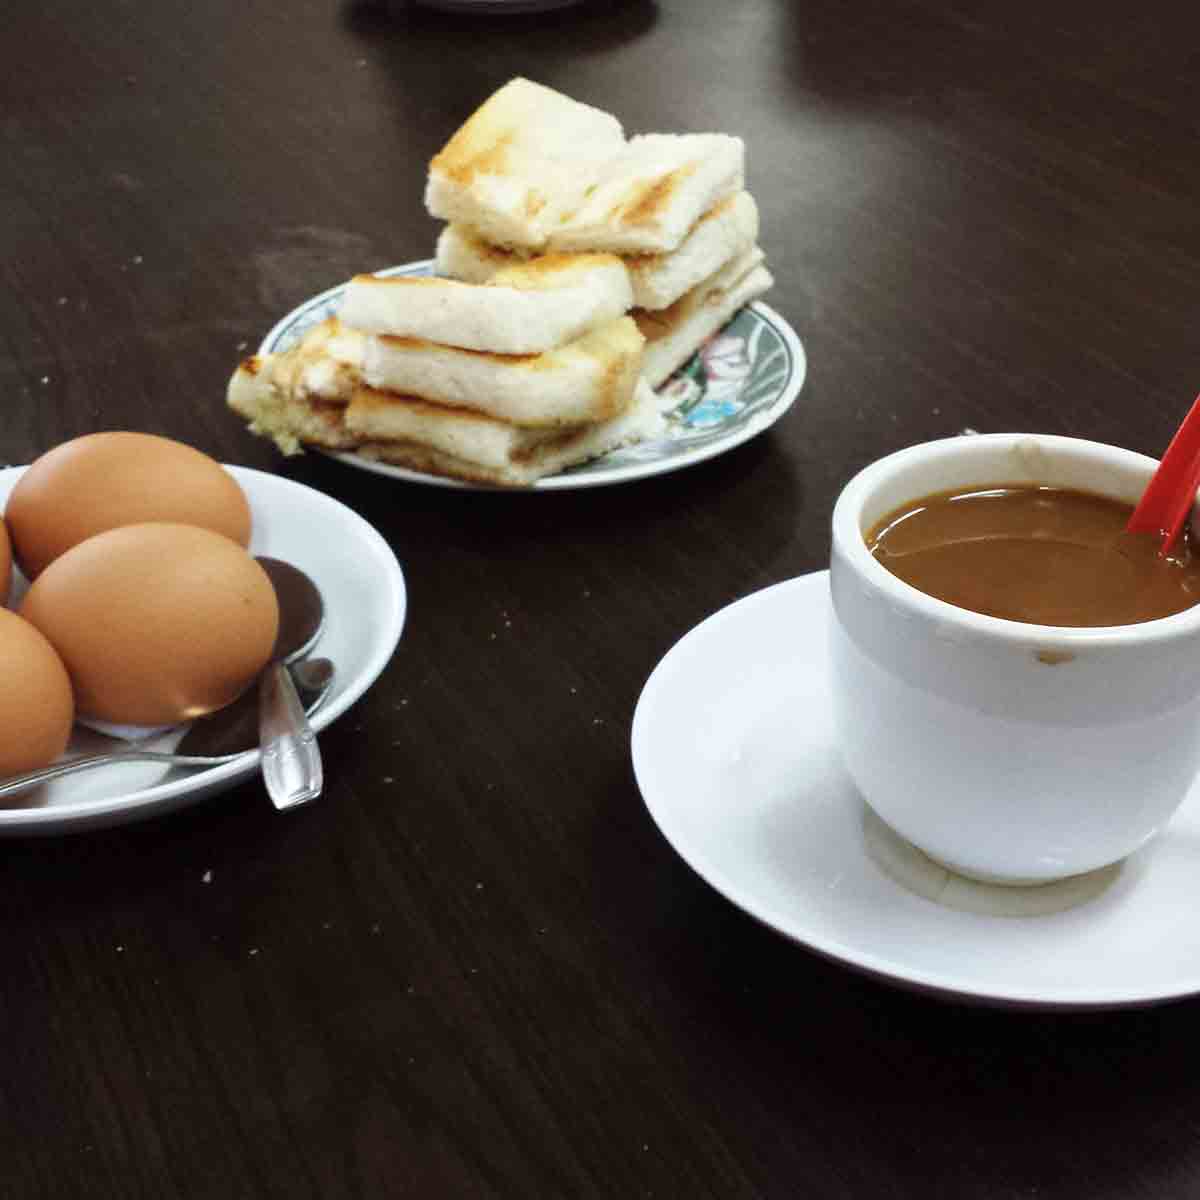 A plat of kaya toast strips, a plate with five soft-boiled eggs, a saucer and cup with coffee and cream and an odd red plastic spoon.